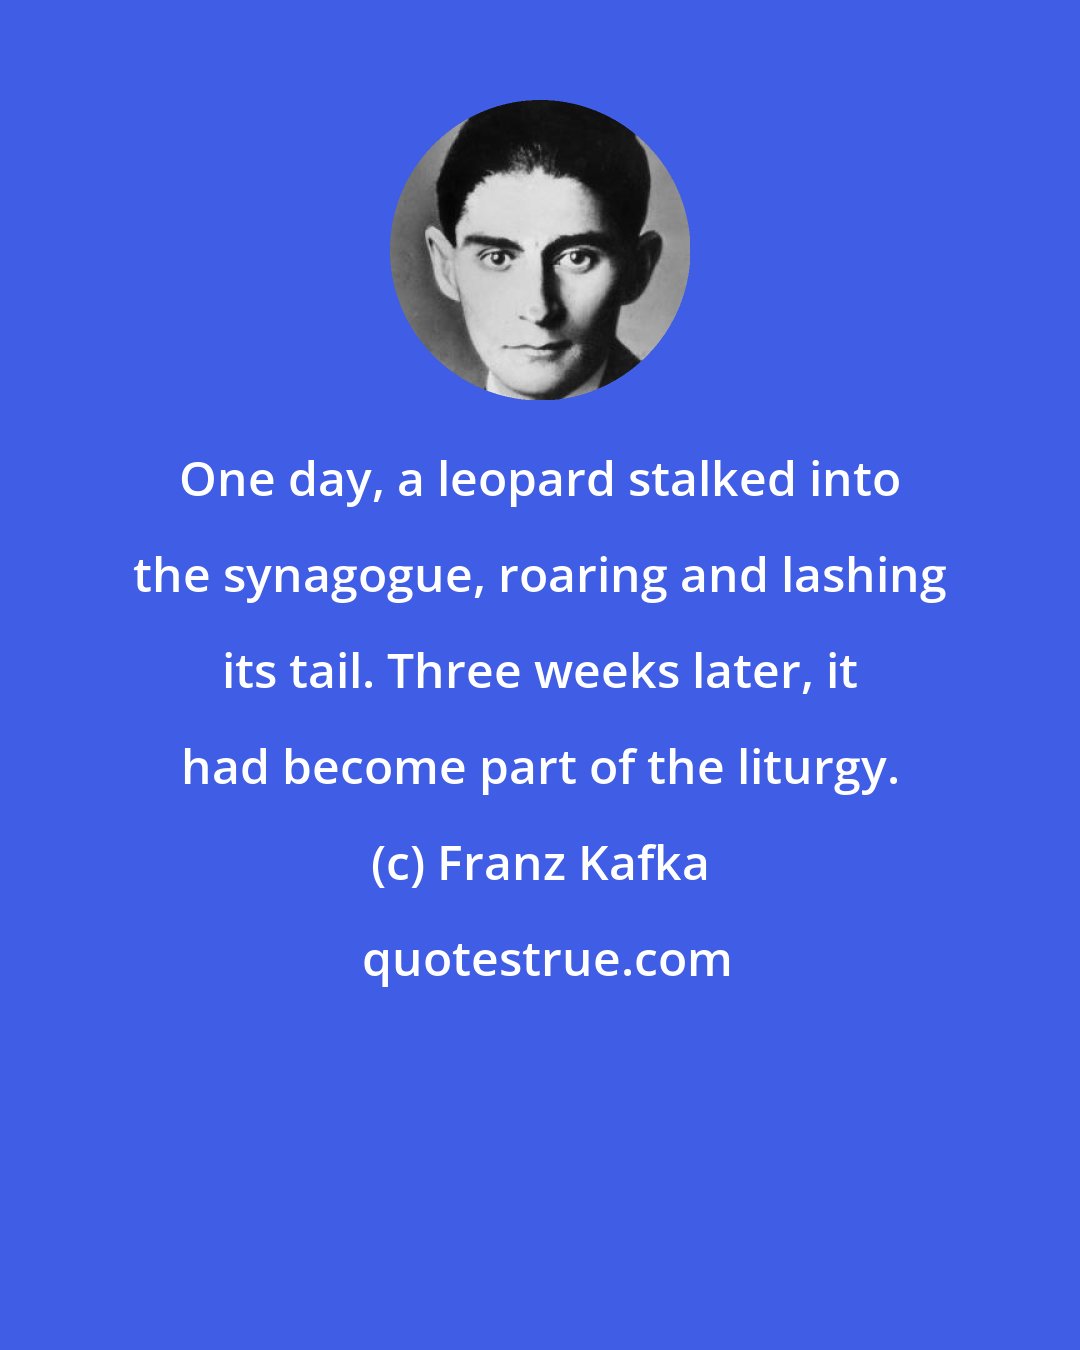 Franz Kafka: One day, a leopard stalked into the synagogue, roaring and lashing its tail. Three weeks later, it had become part of the liturgy.